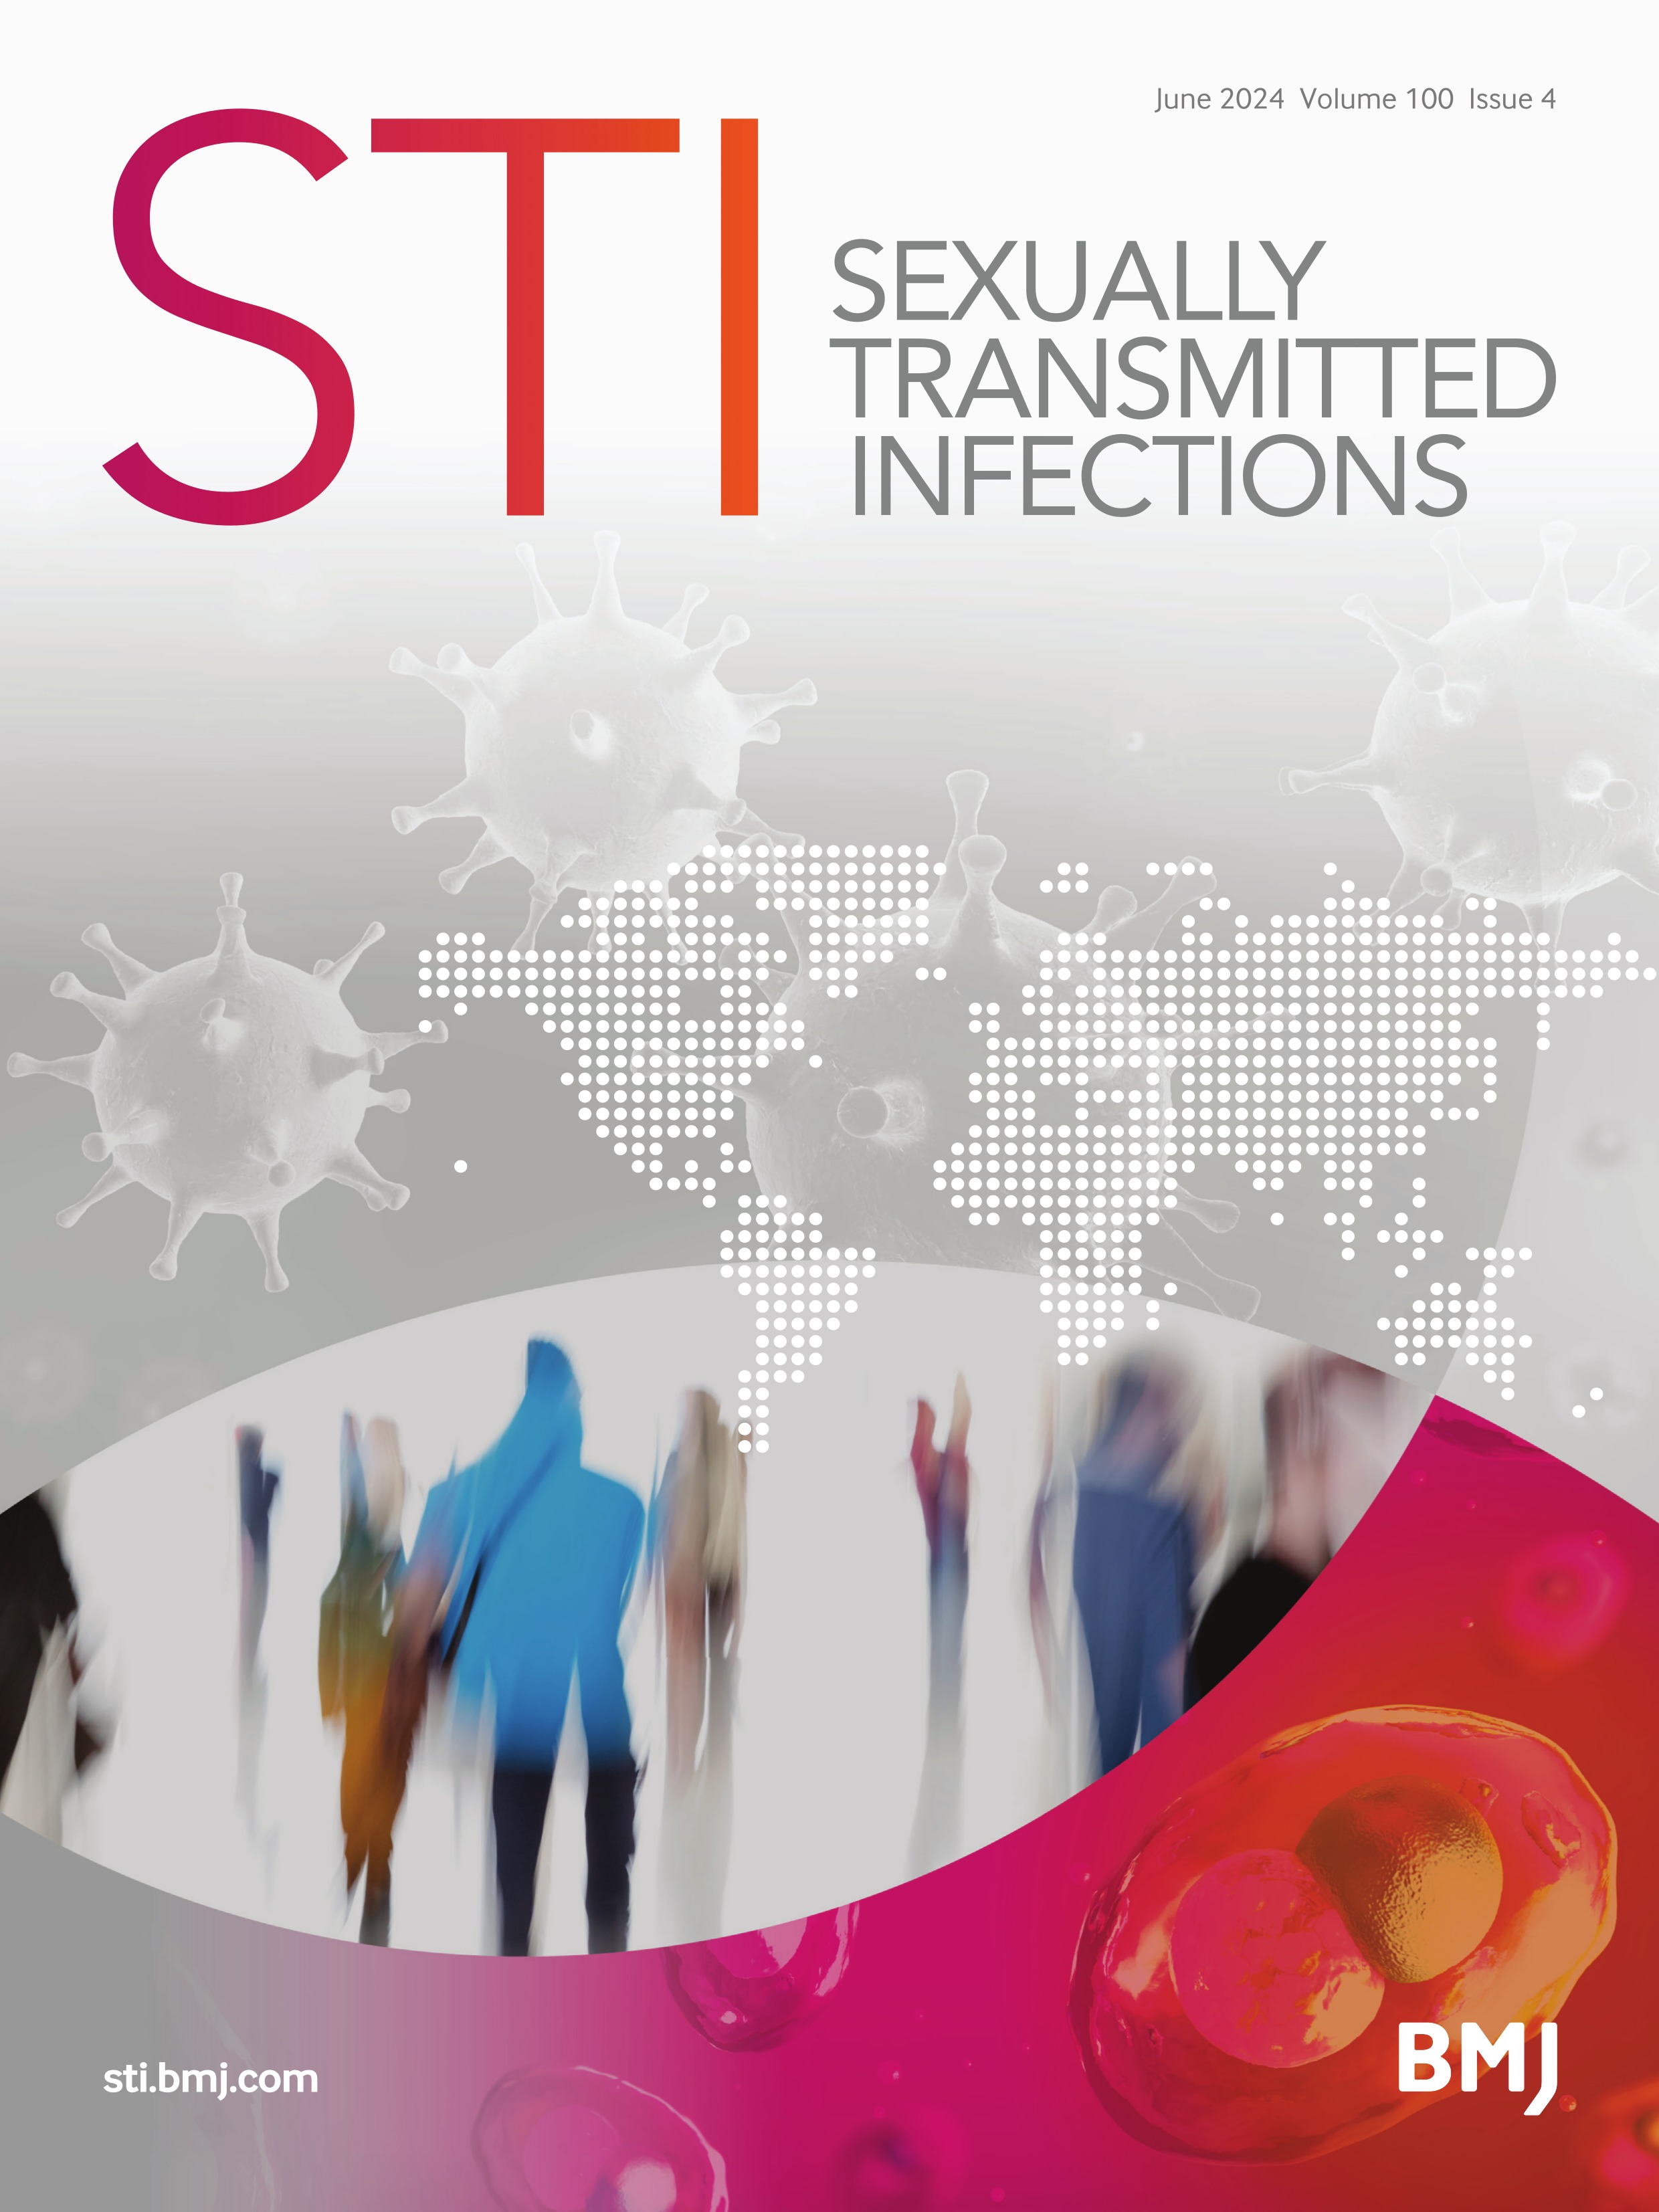 Identifying priority groups for pre-exposure prophylaxis among sex workers in Flanders, Belgium: insights into routine HIV and sexually transmitted infection data in community-based clinics